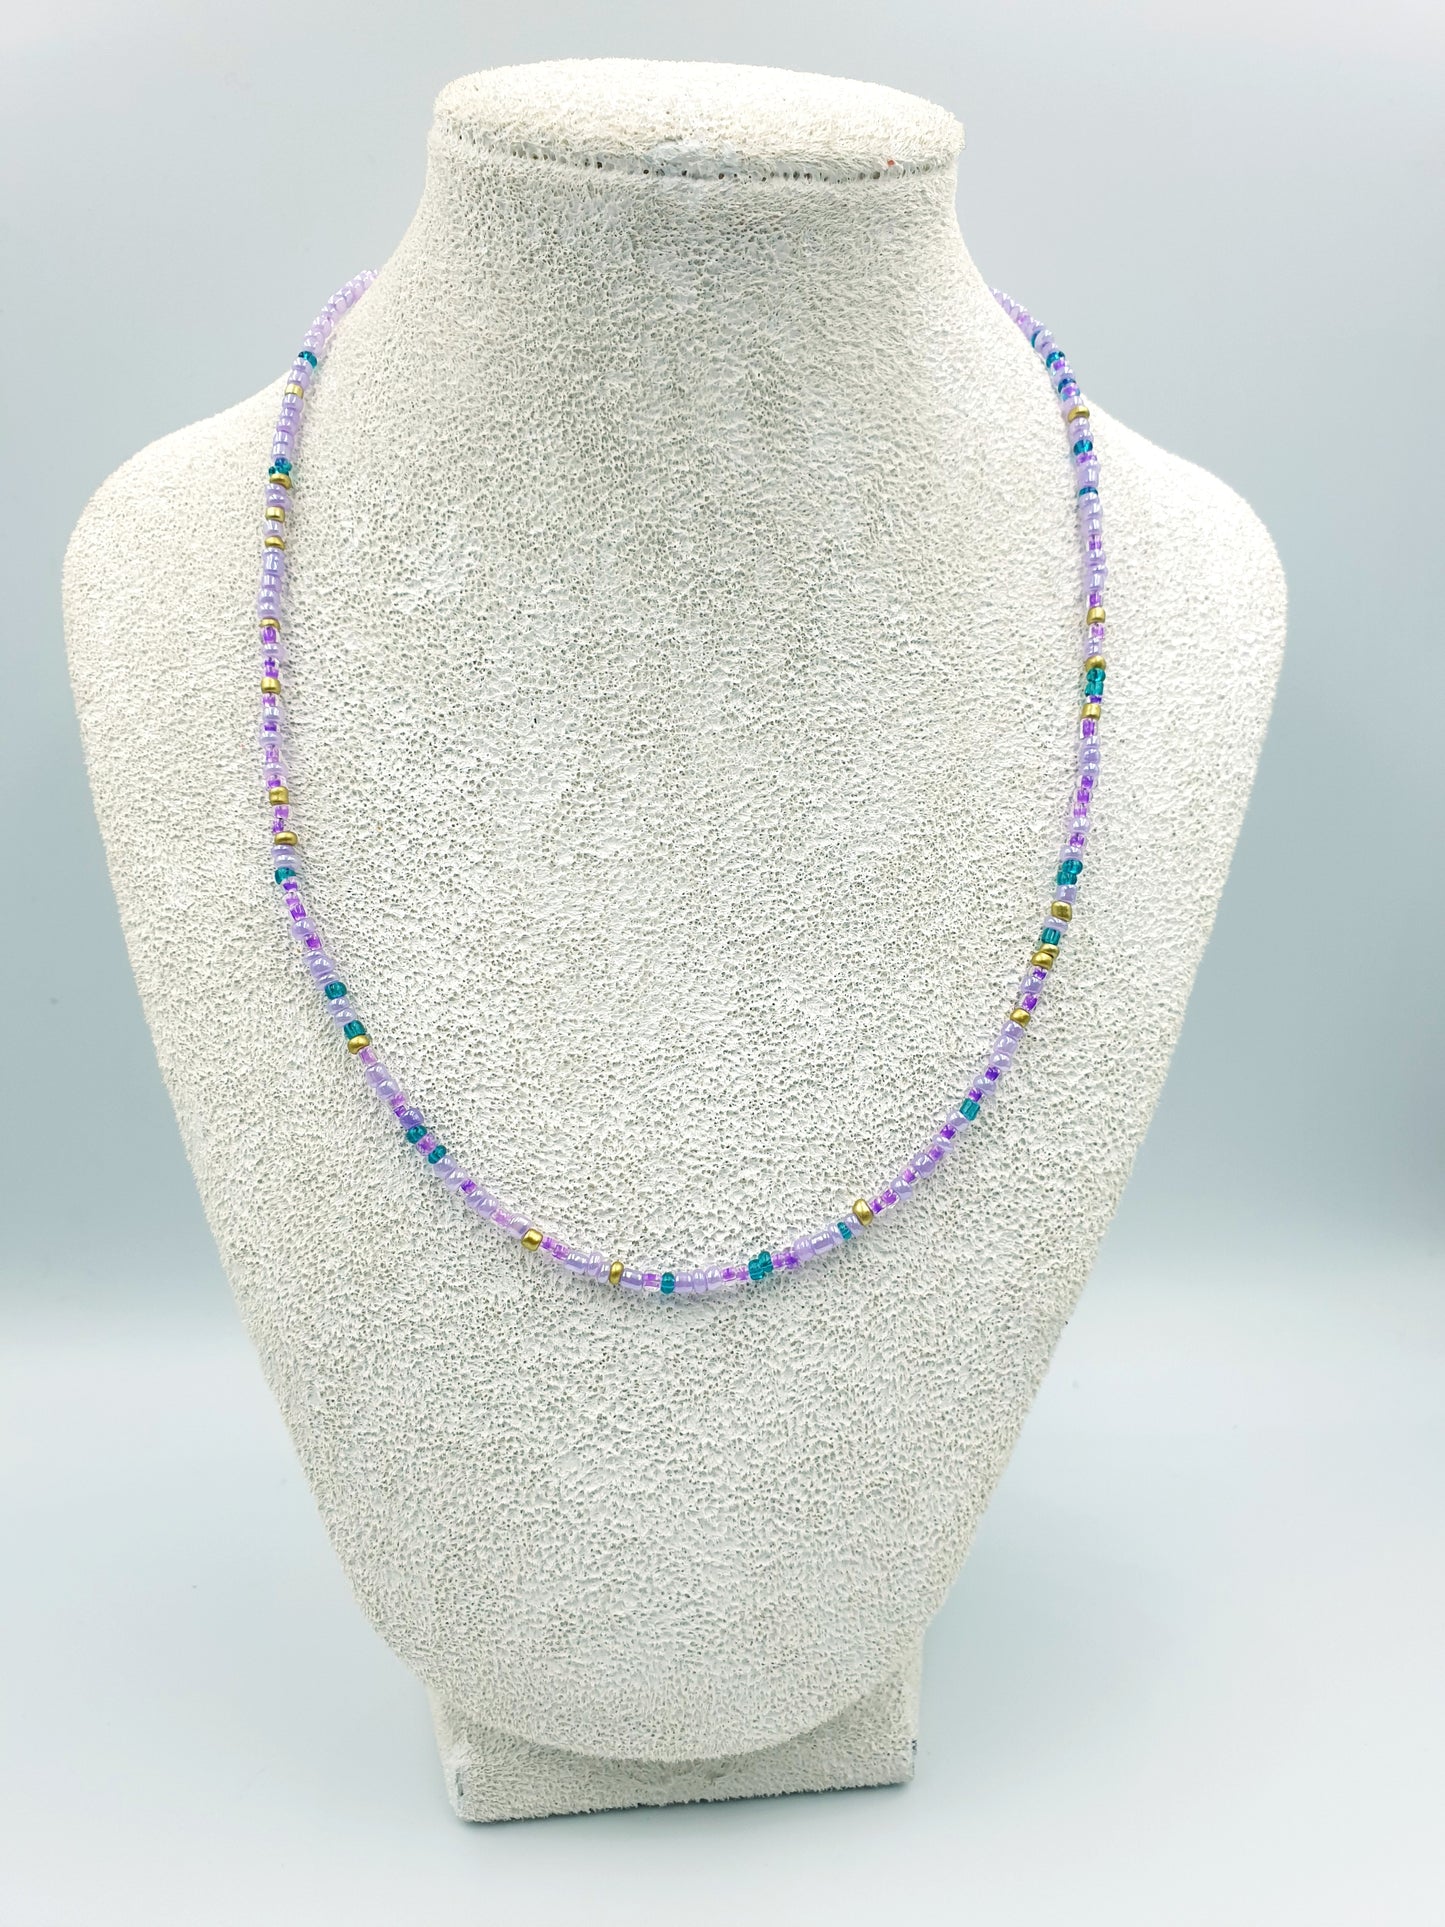 Beaded necklace, beads, beaded necklace, girls jewelery, ladies necklace, choker necklace, unique gifts, popular, 90s vibes, boho, bohemian jewelery, funky jewellery, summer vibes, Rainbow